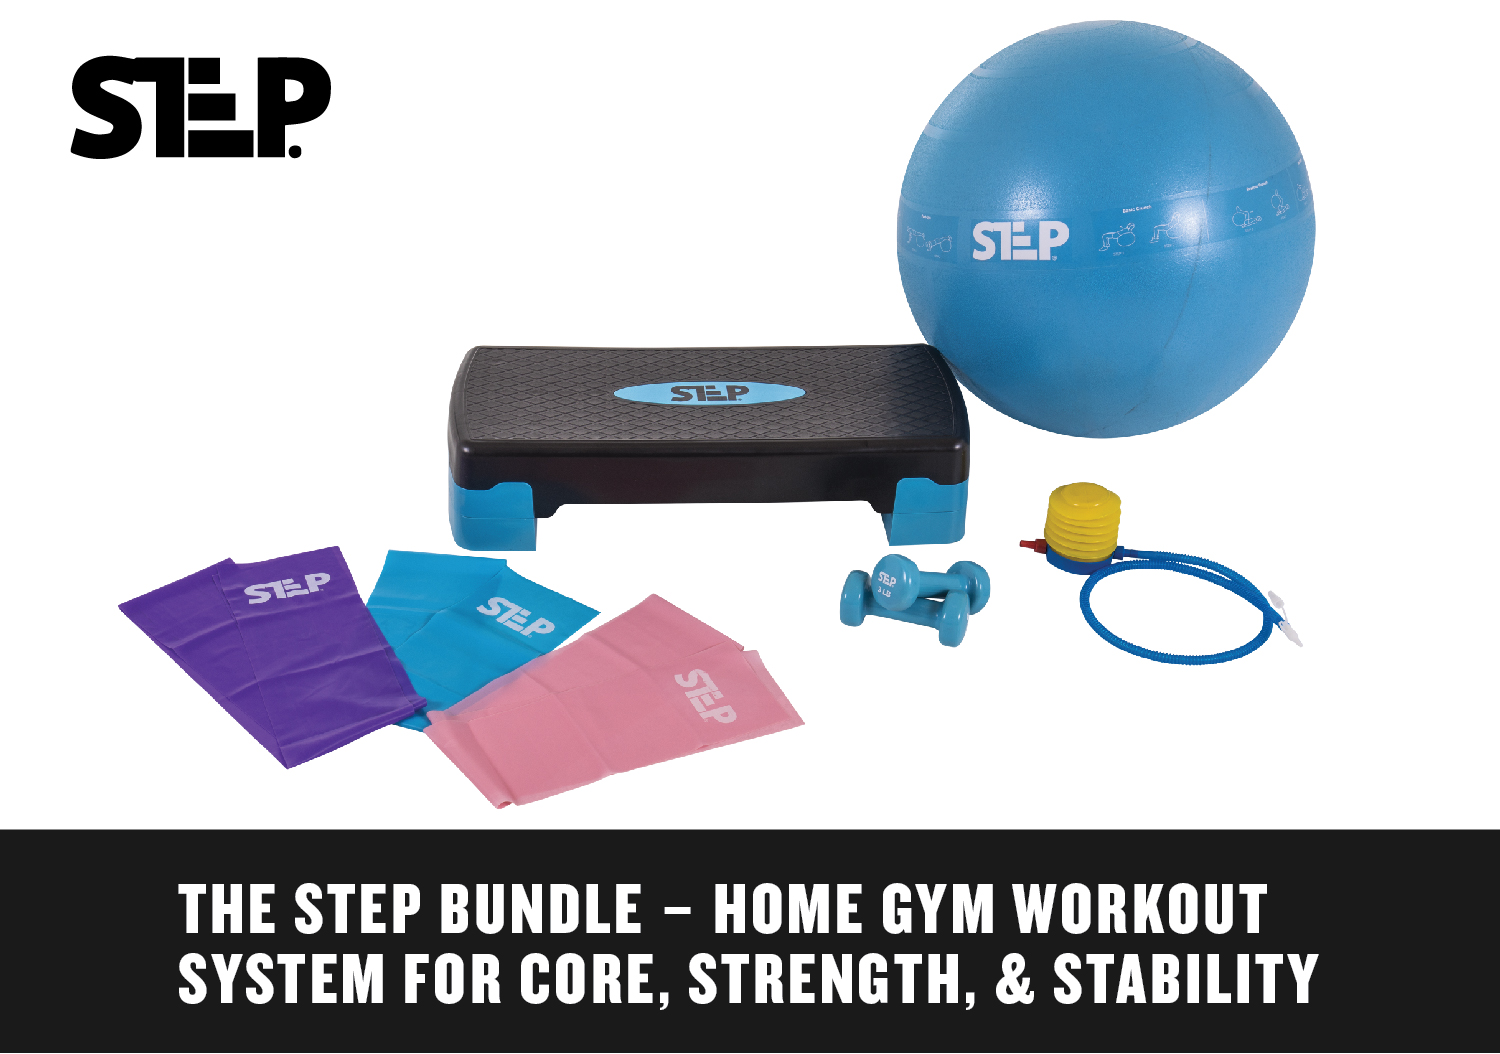 The Step Bundle (The Step, Flat Resistance Bands, Dumbbells, and Resistance Ball) - image 3 of 6